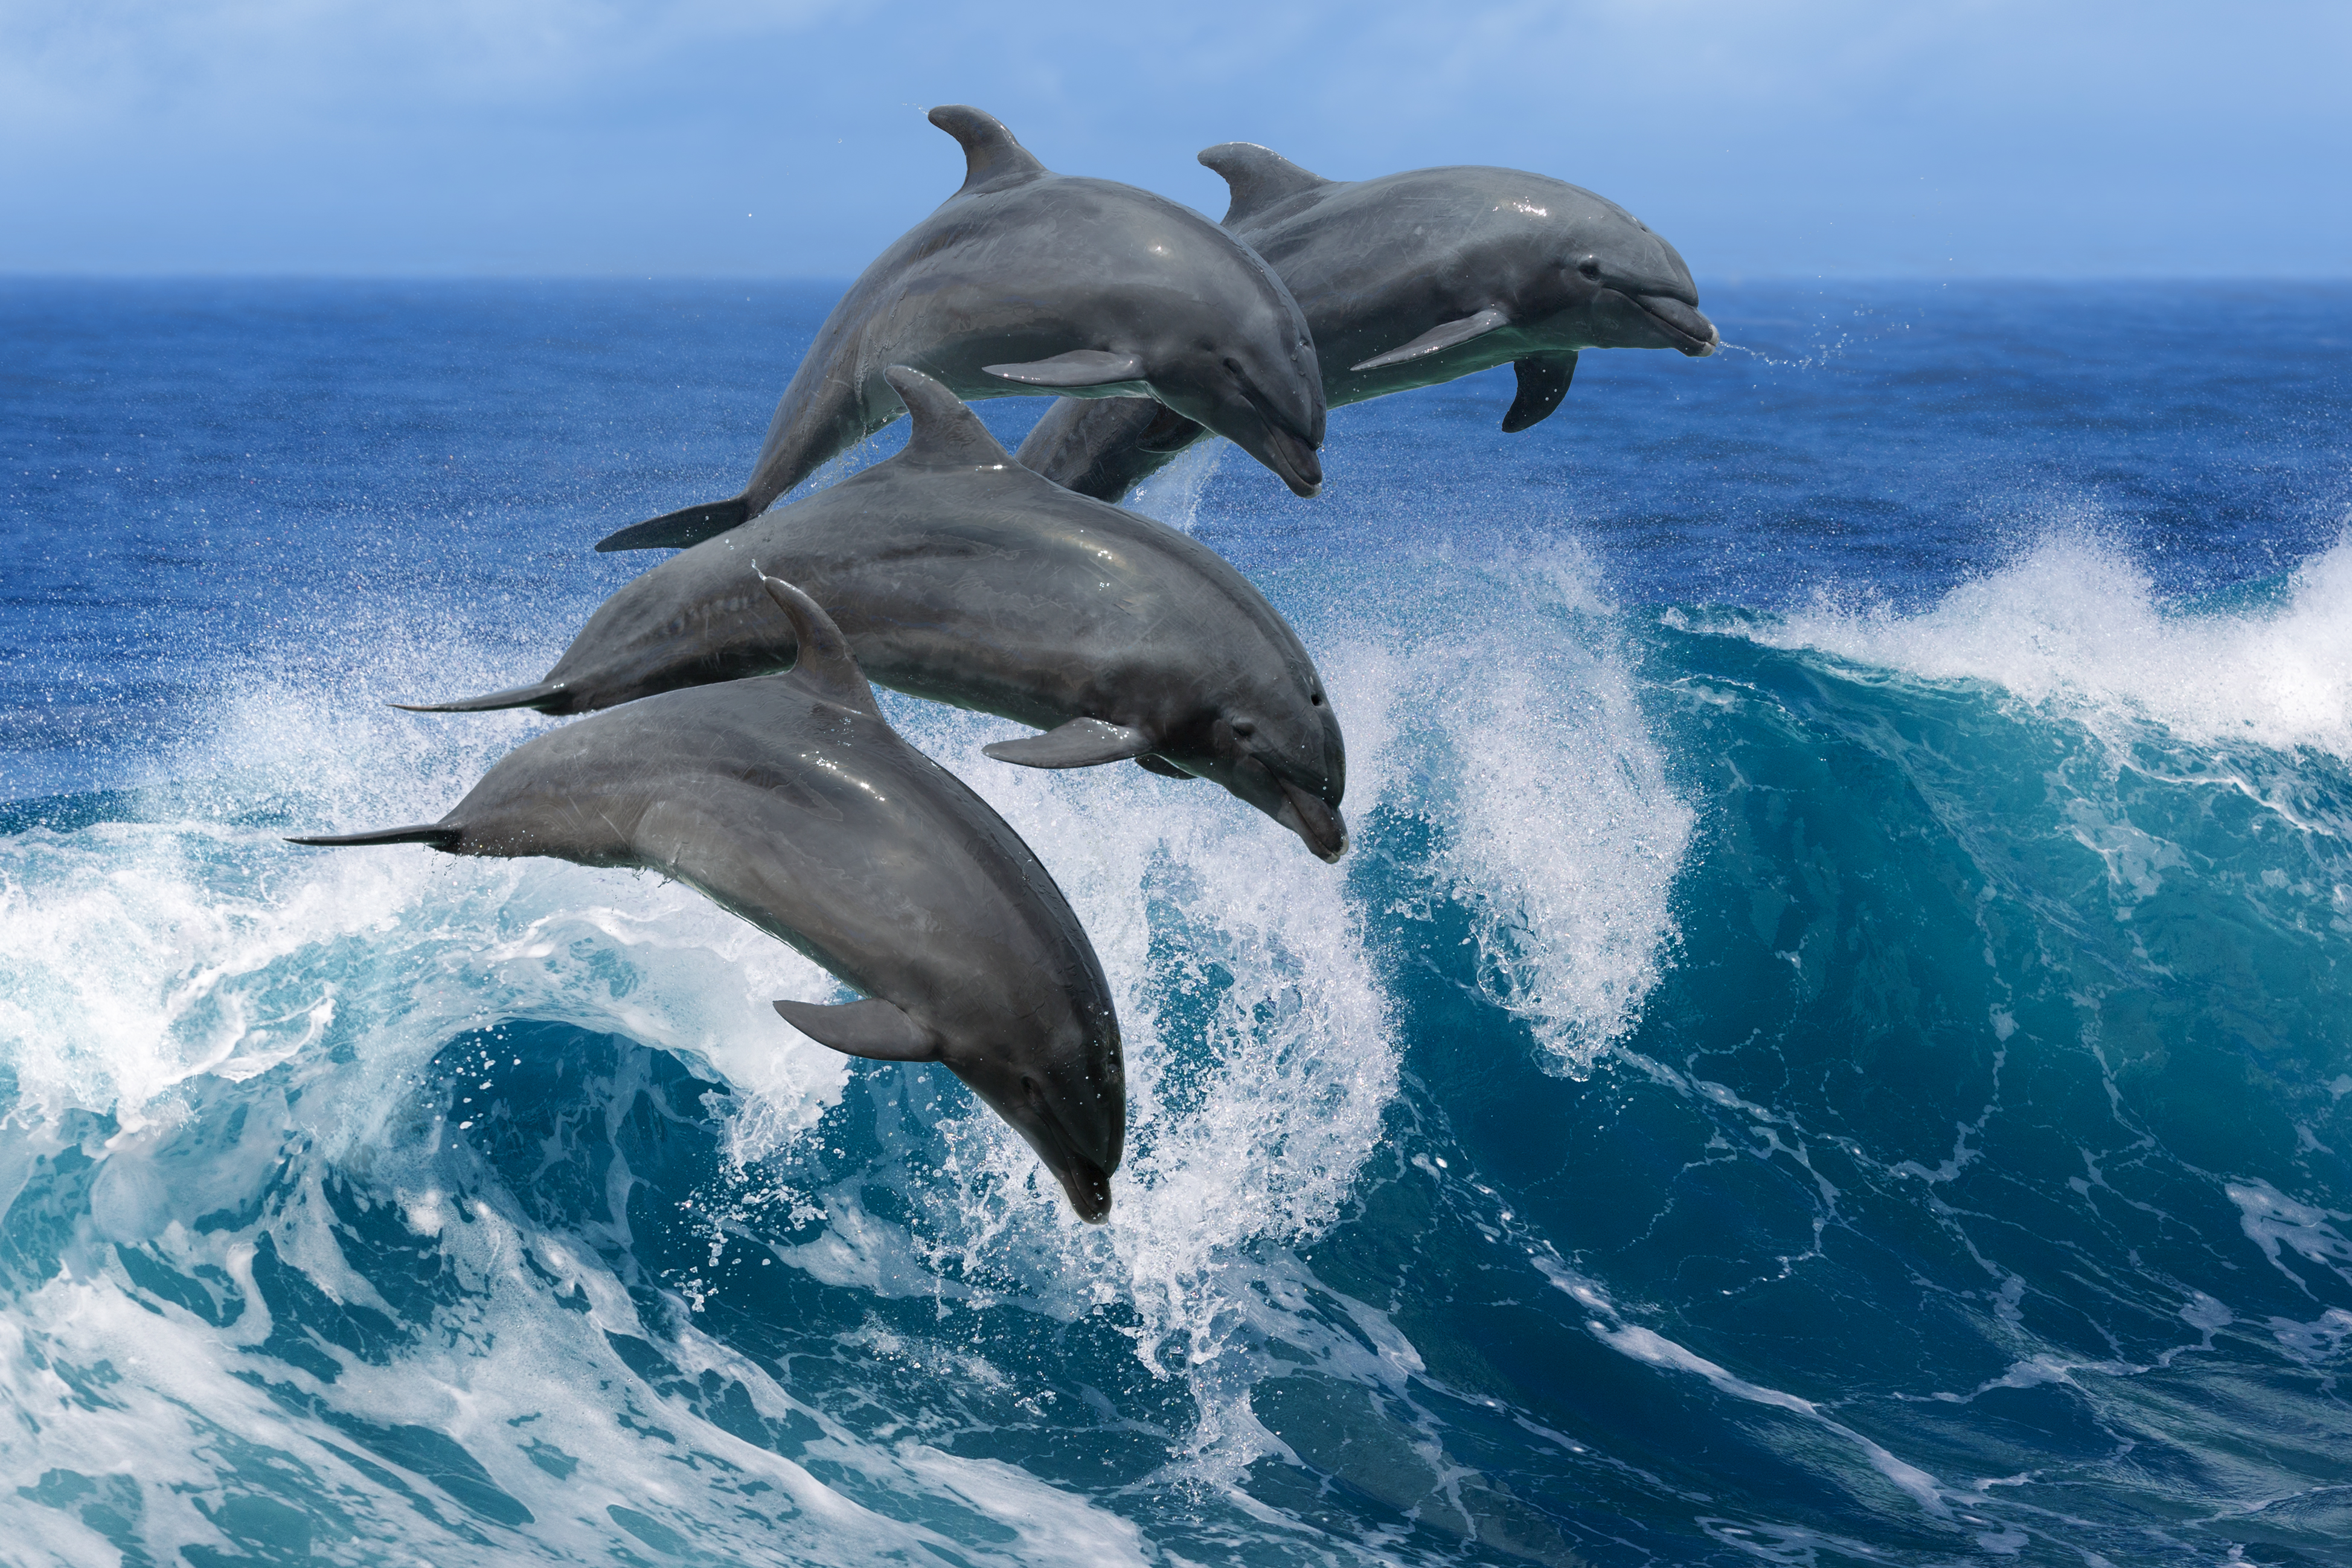 Get Closer to Wildlife in Hawaii - Dolphins